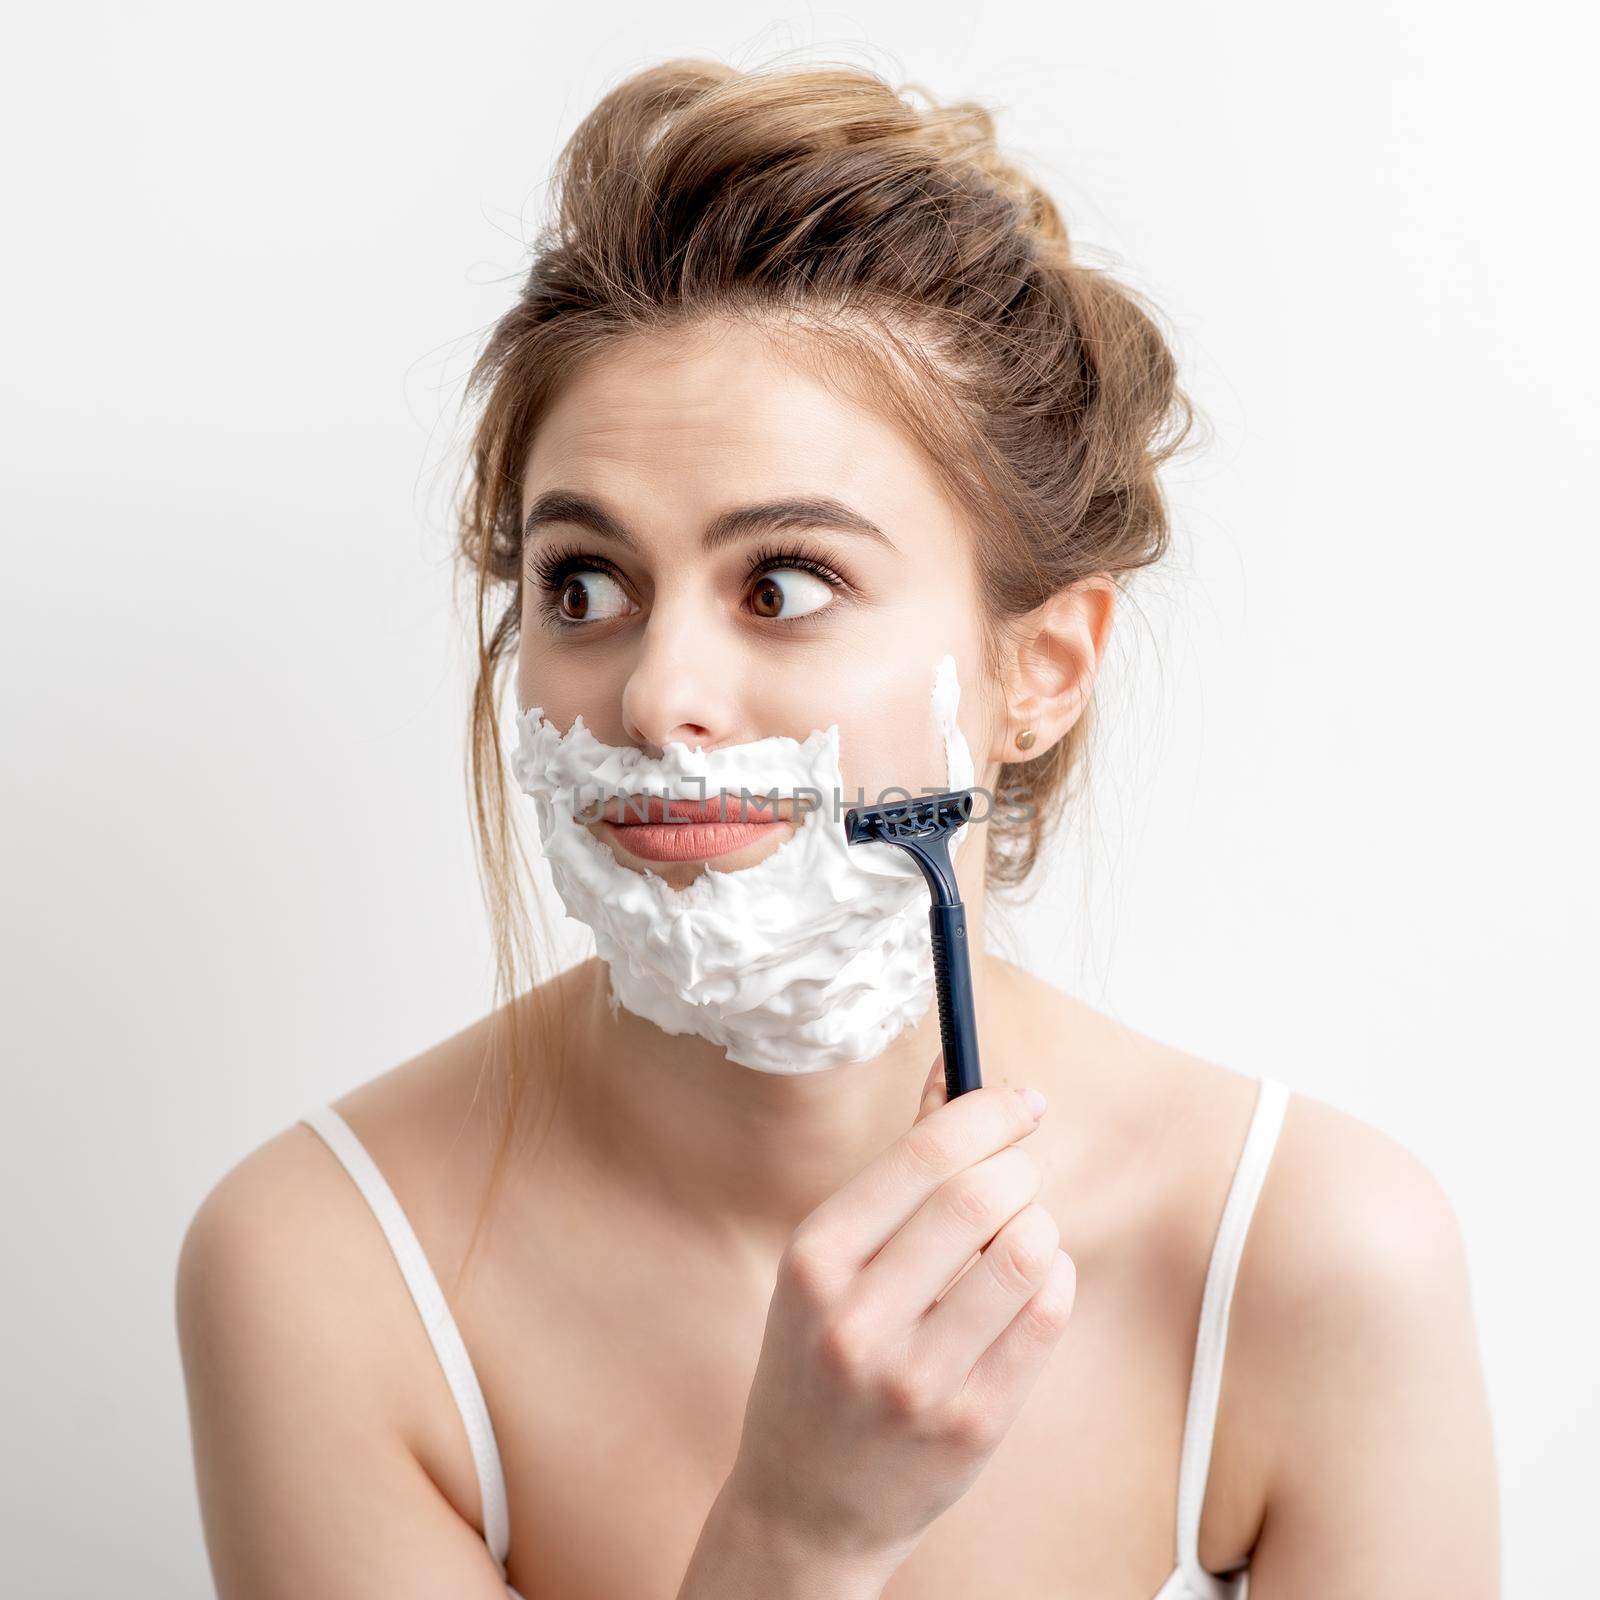 Beautiful young caucasian woman shaving her face by razor on white background. Pretty woman with shaving foam on her face